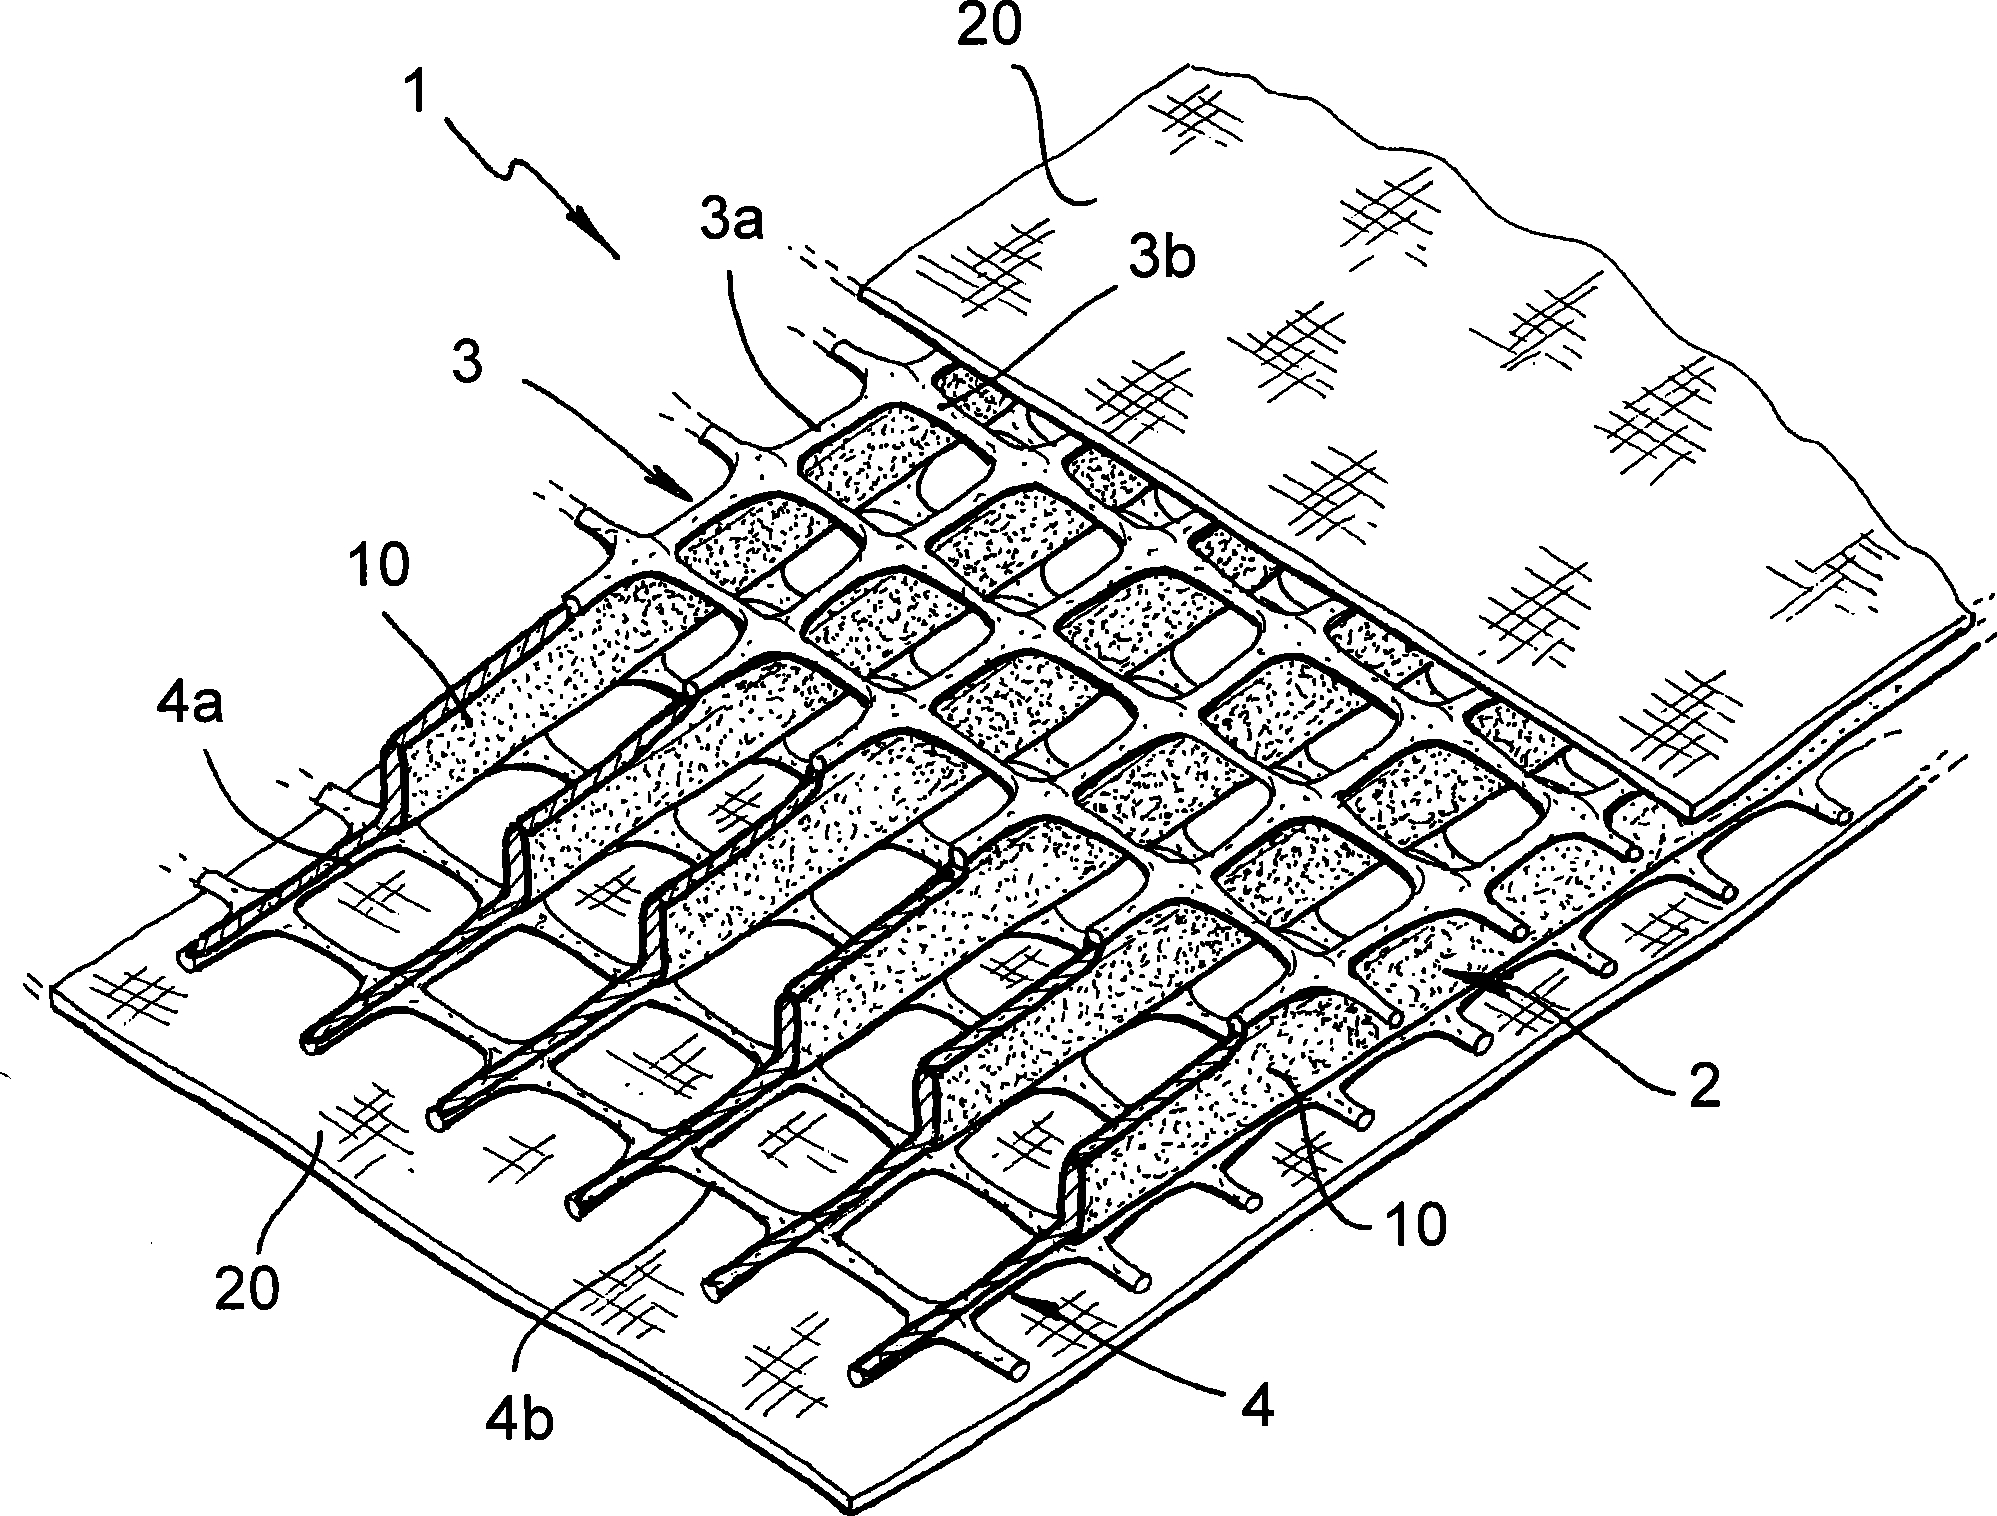 Draining and filtering net, particularly for geotechnical applications